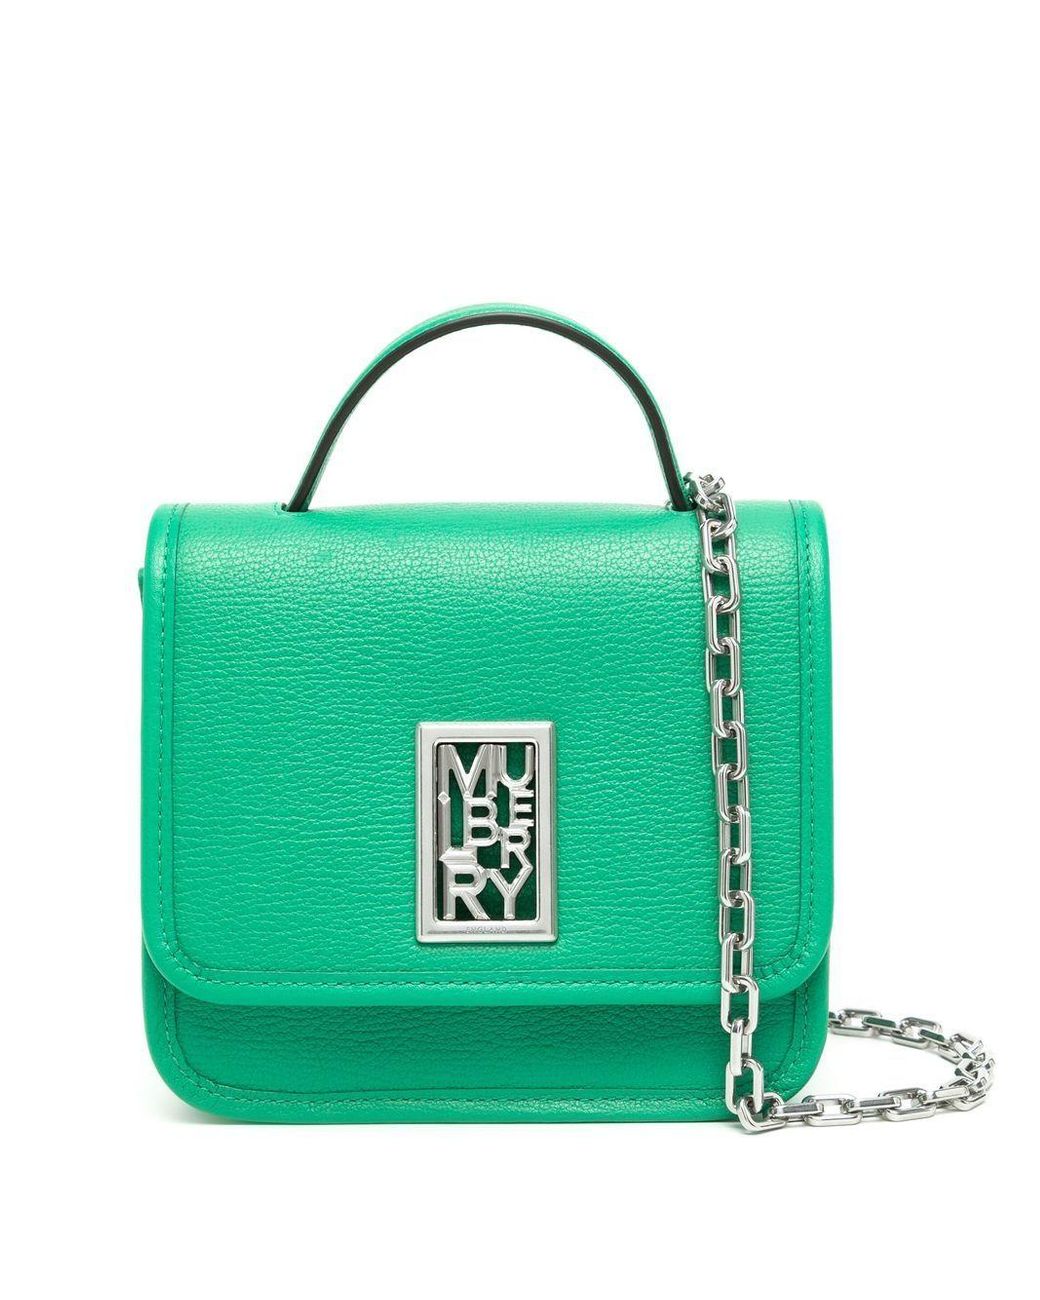 Mulberry Sadie Square Grained-leather Bag in Green | Lyst